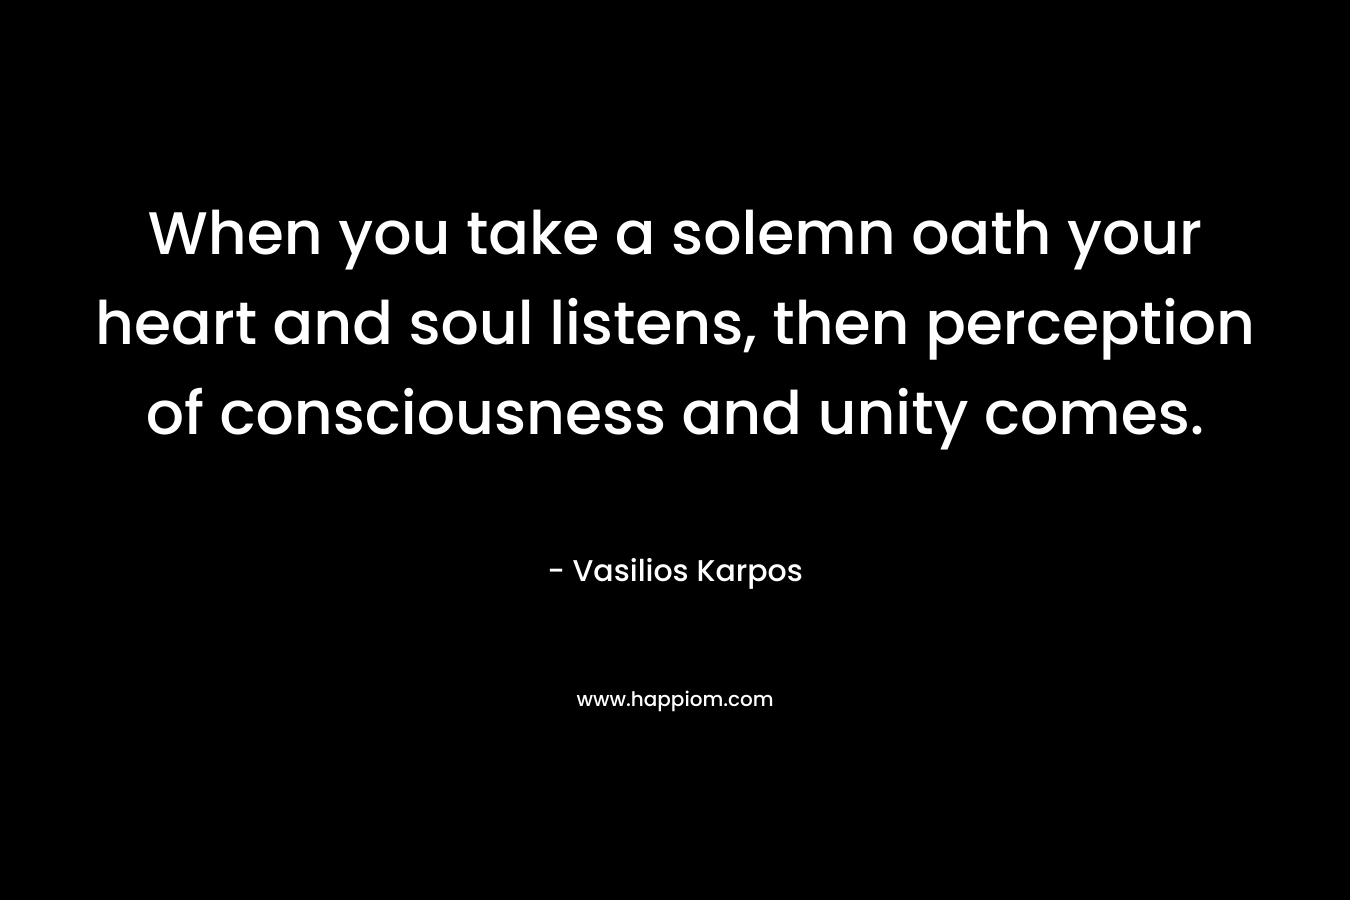 When you take a solemn oath your heart and soul listens, then perception of consciousness and unity comes. – Vasilios Karpos